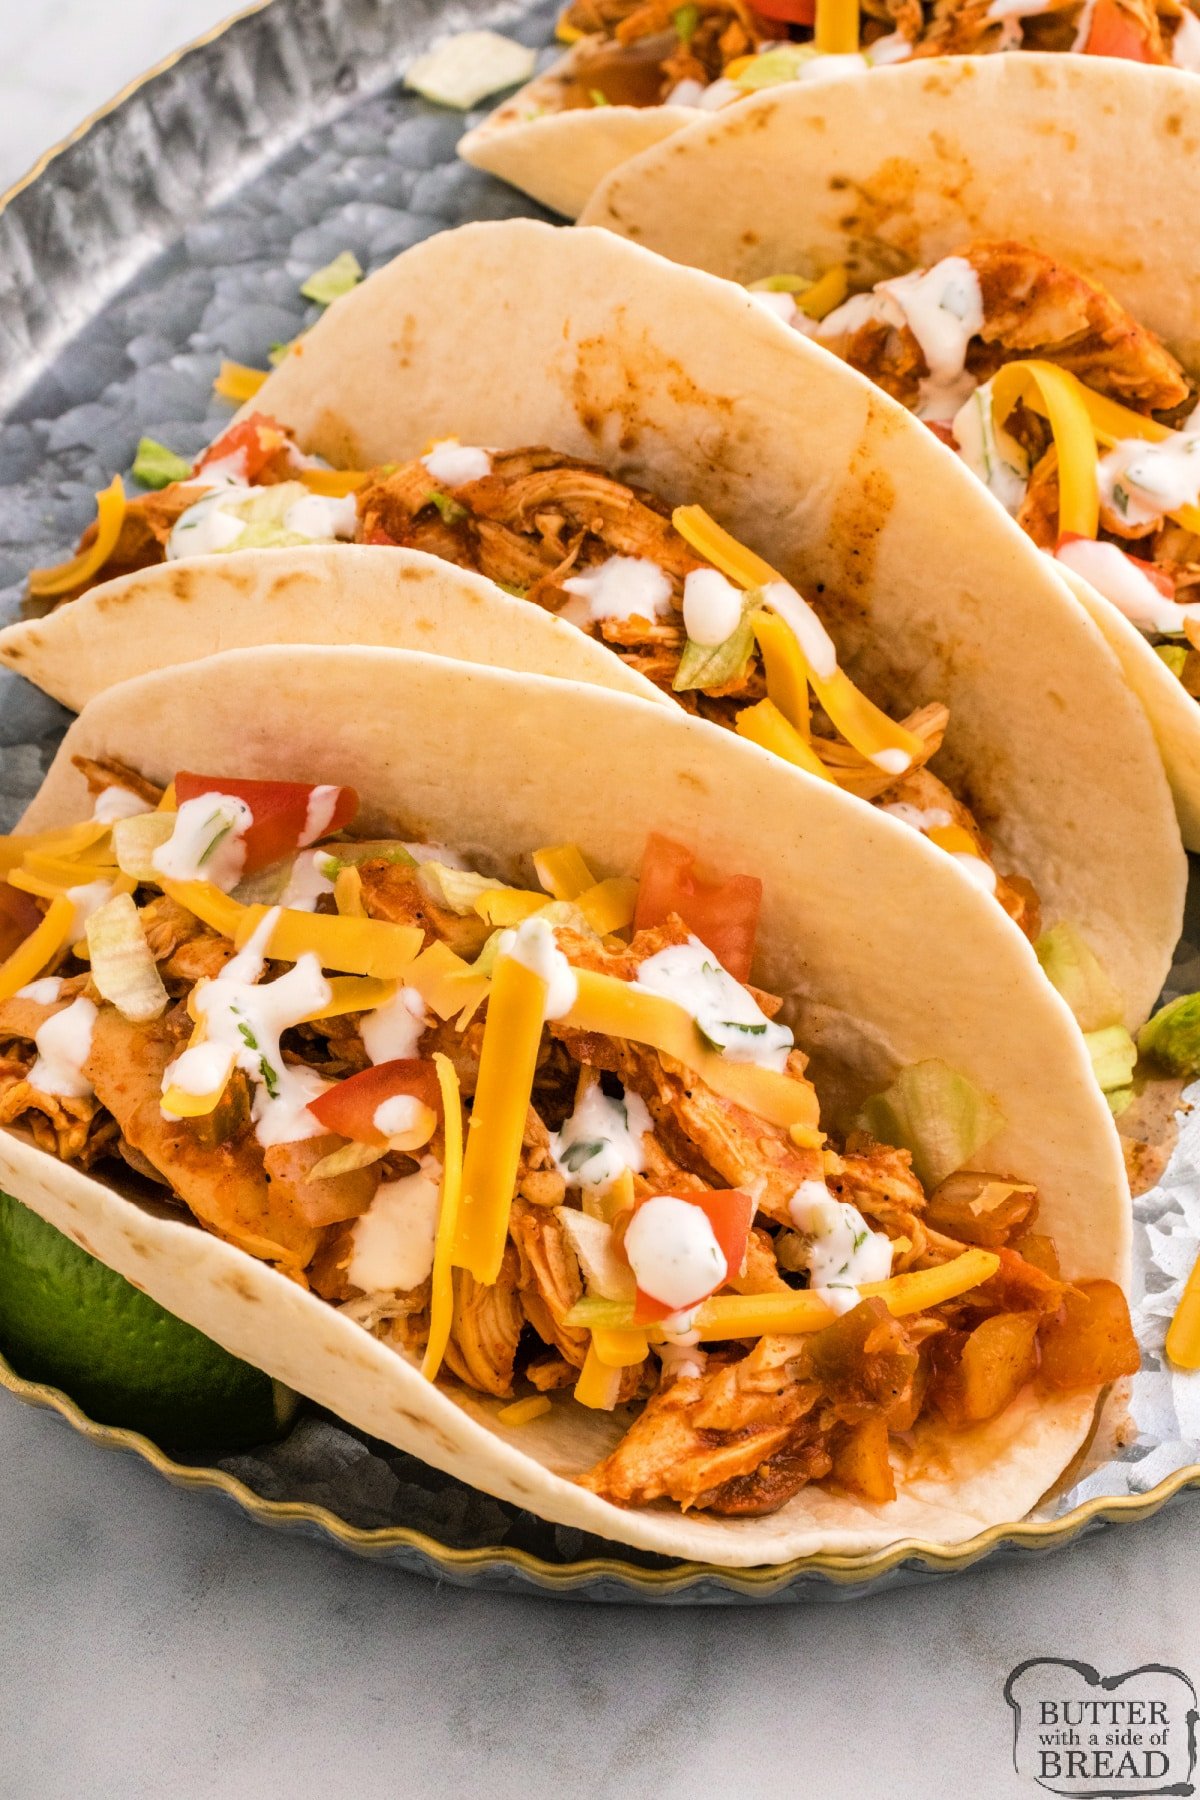 Tacos made with flavorful chicken. 